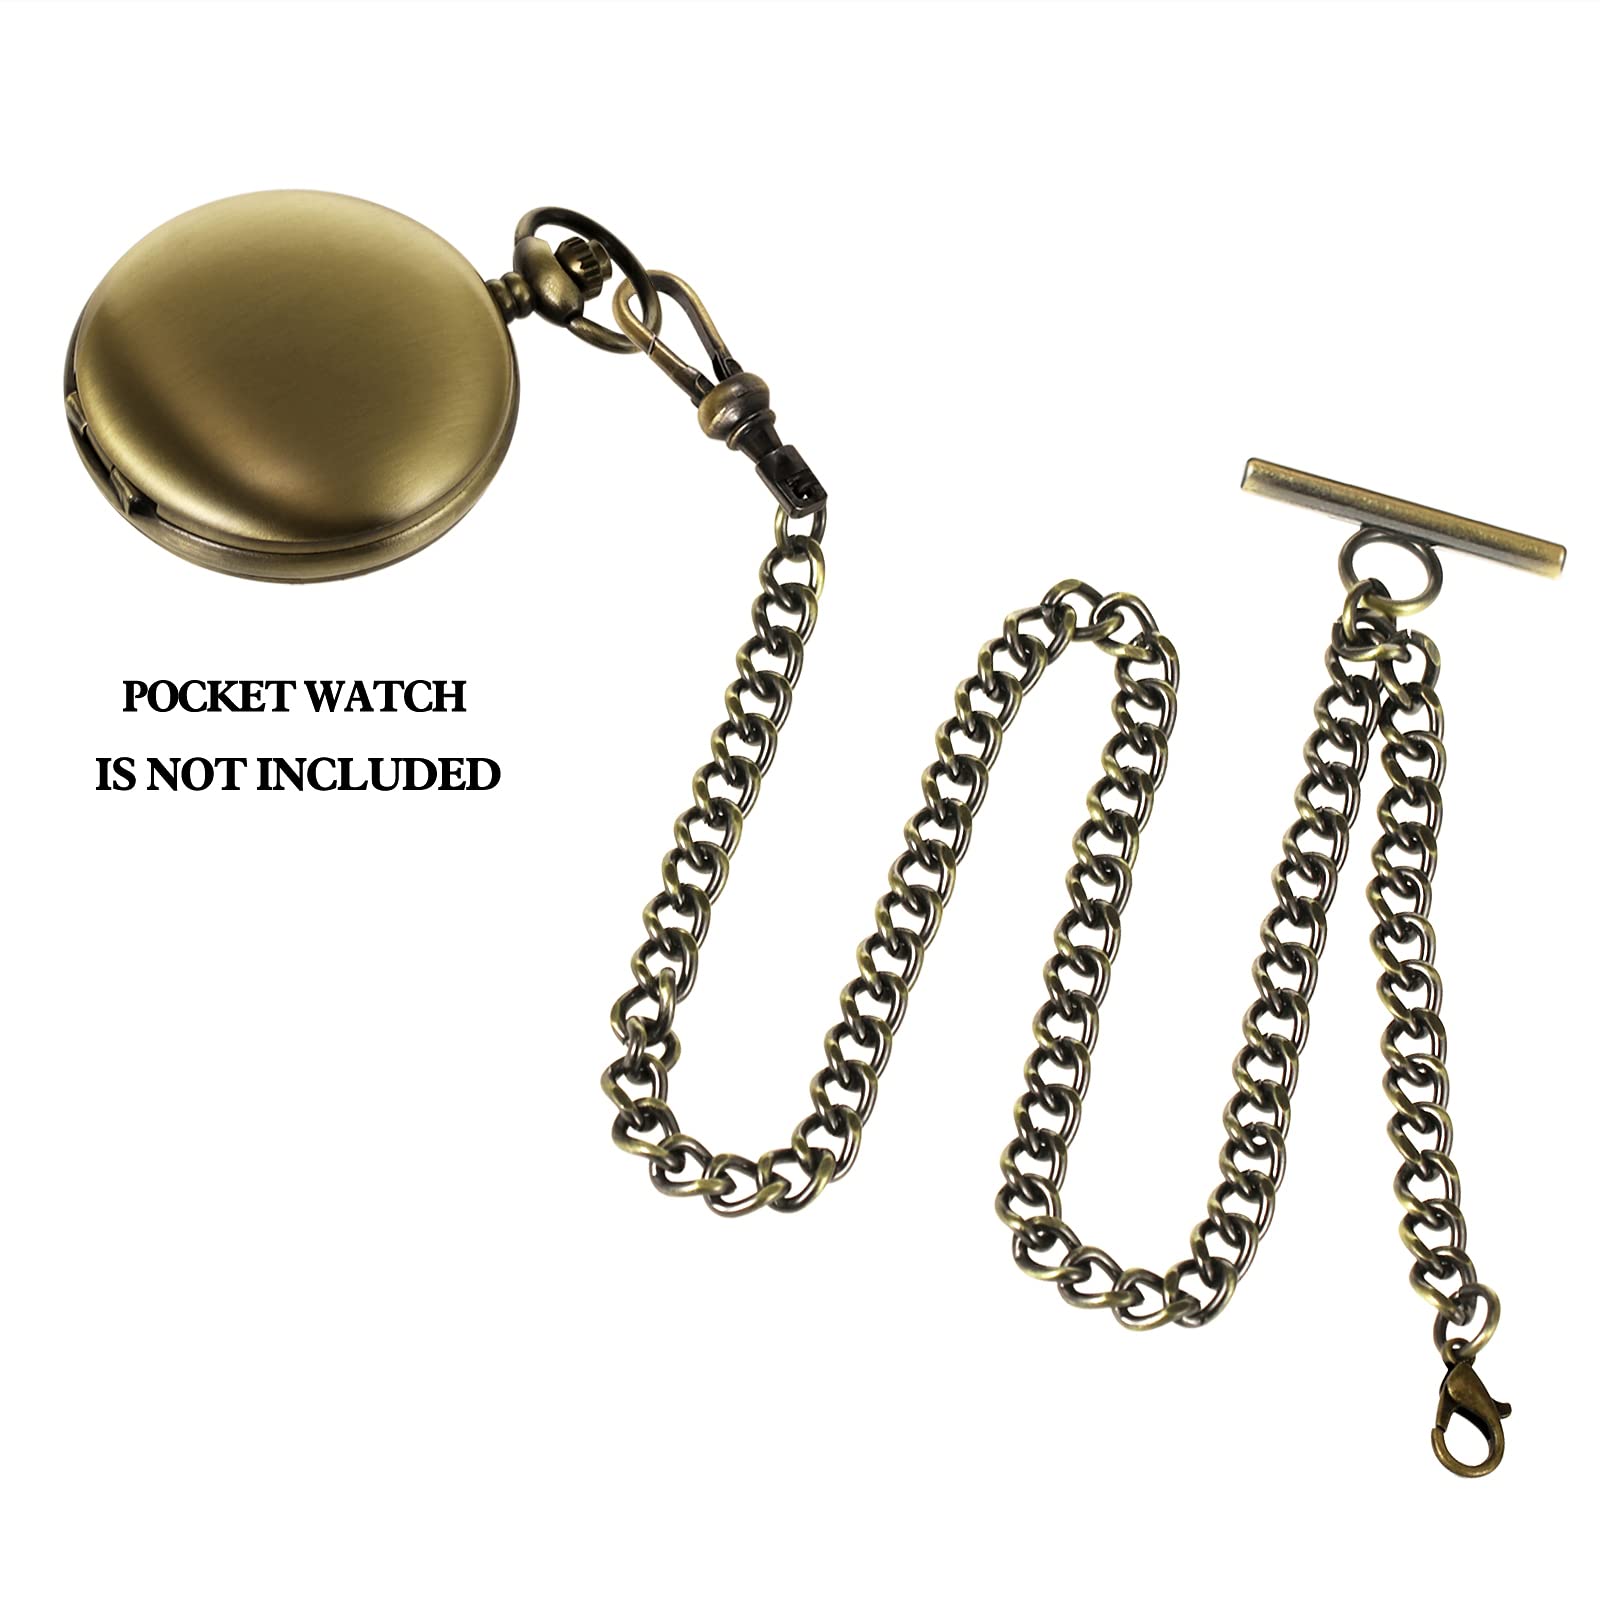 ZTA Albert Chain Pocket Watch Chain Fob Chain for Men Cross Pendant Design Medal Fob with T Bar Swivel Clasp